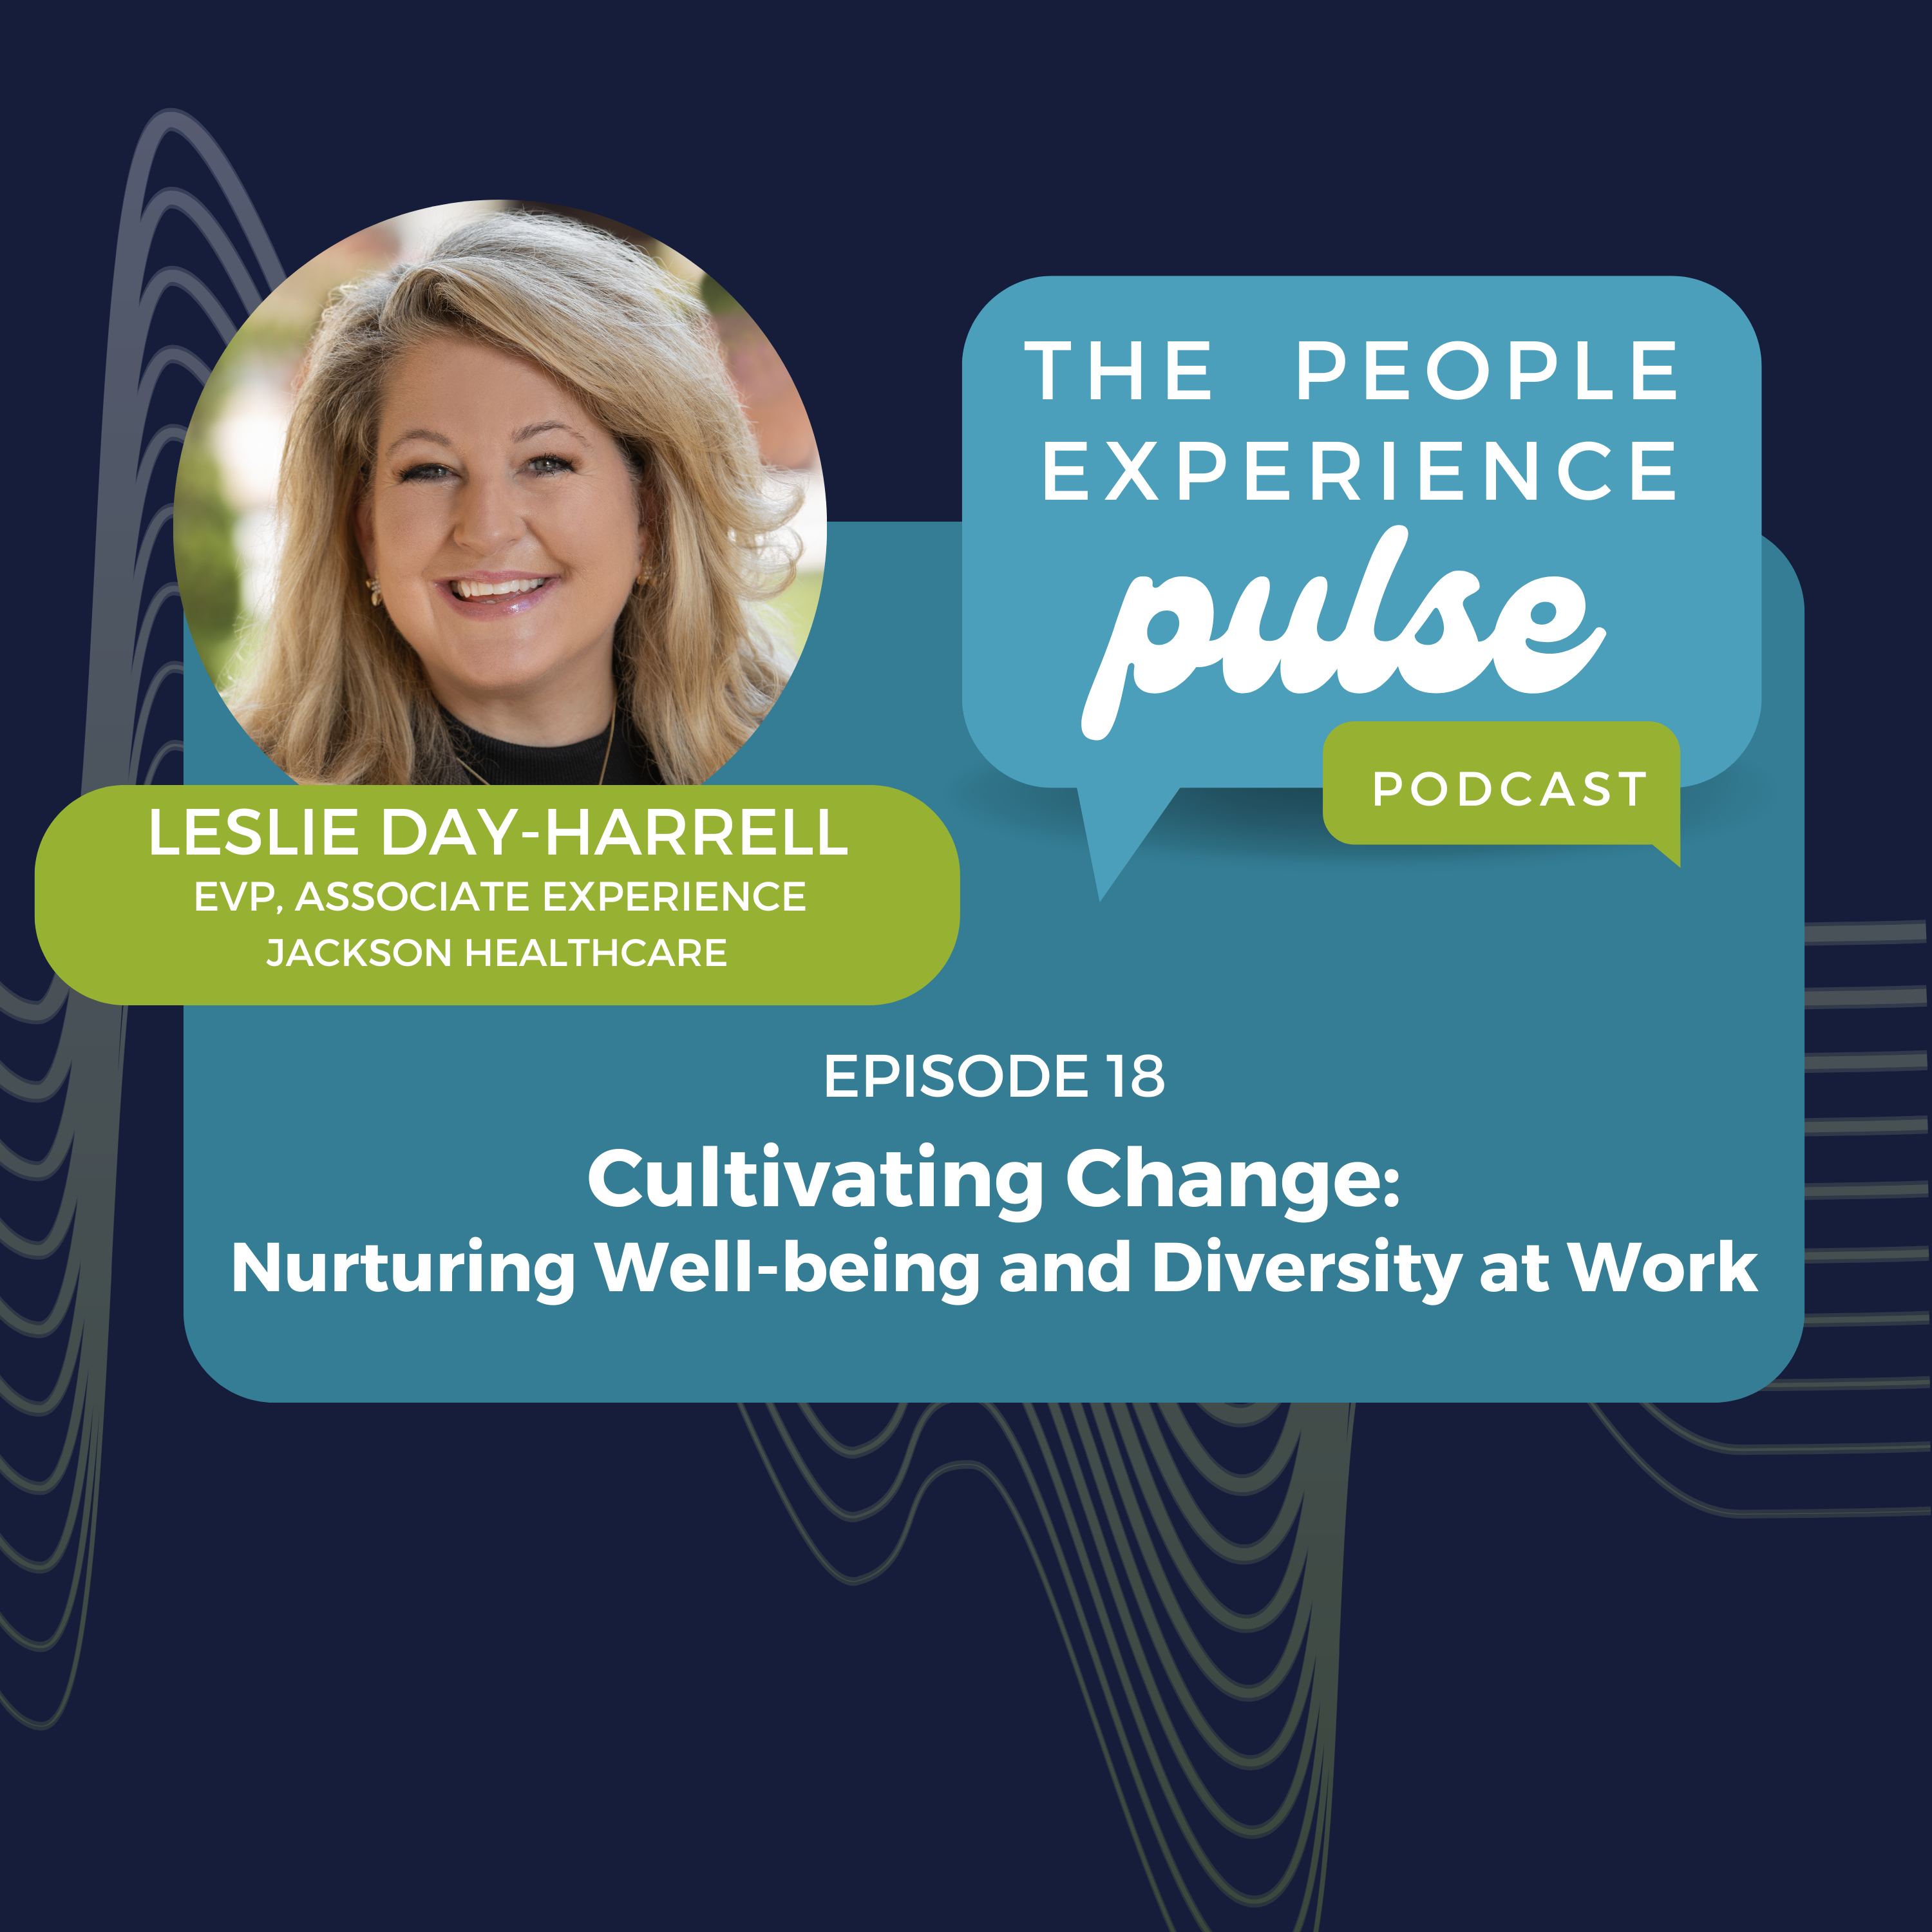 Cultivating Change: Nurturing Well-being and Diversity at Work with Leslie Day-Harrell